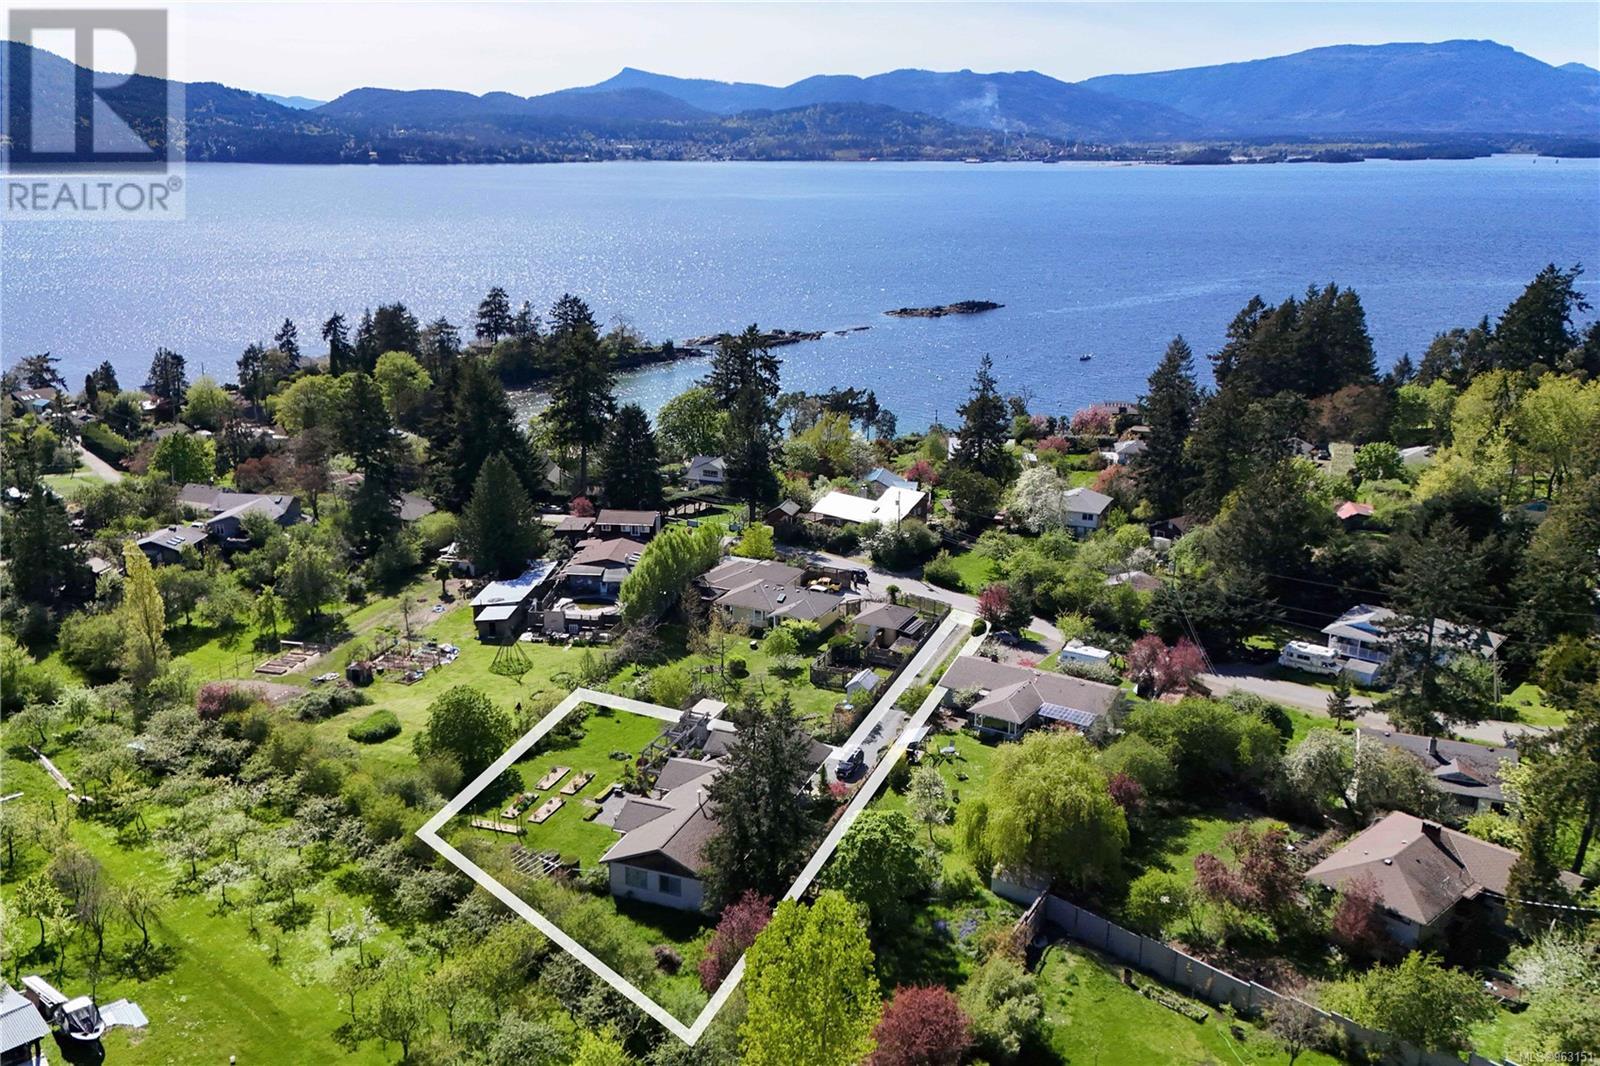 115 Bayview Rd located in Salt Spring, British Columbia